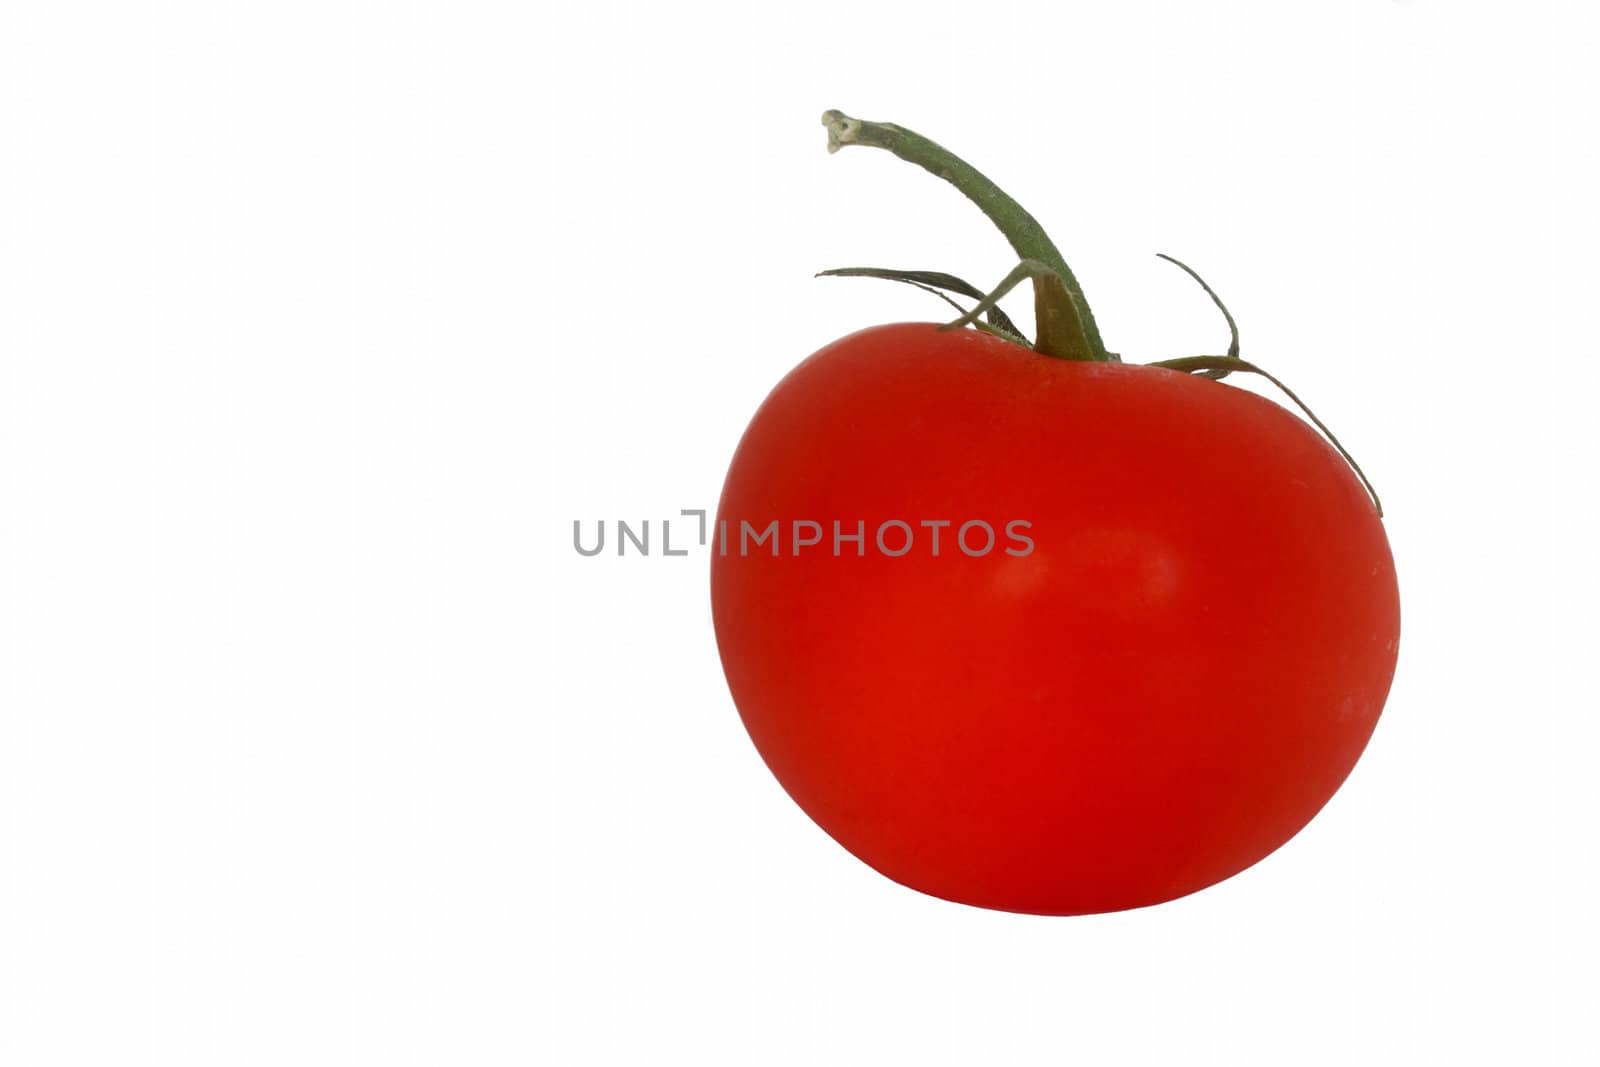 Ripe red tomato on white background by pulen